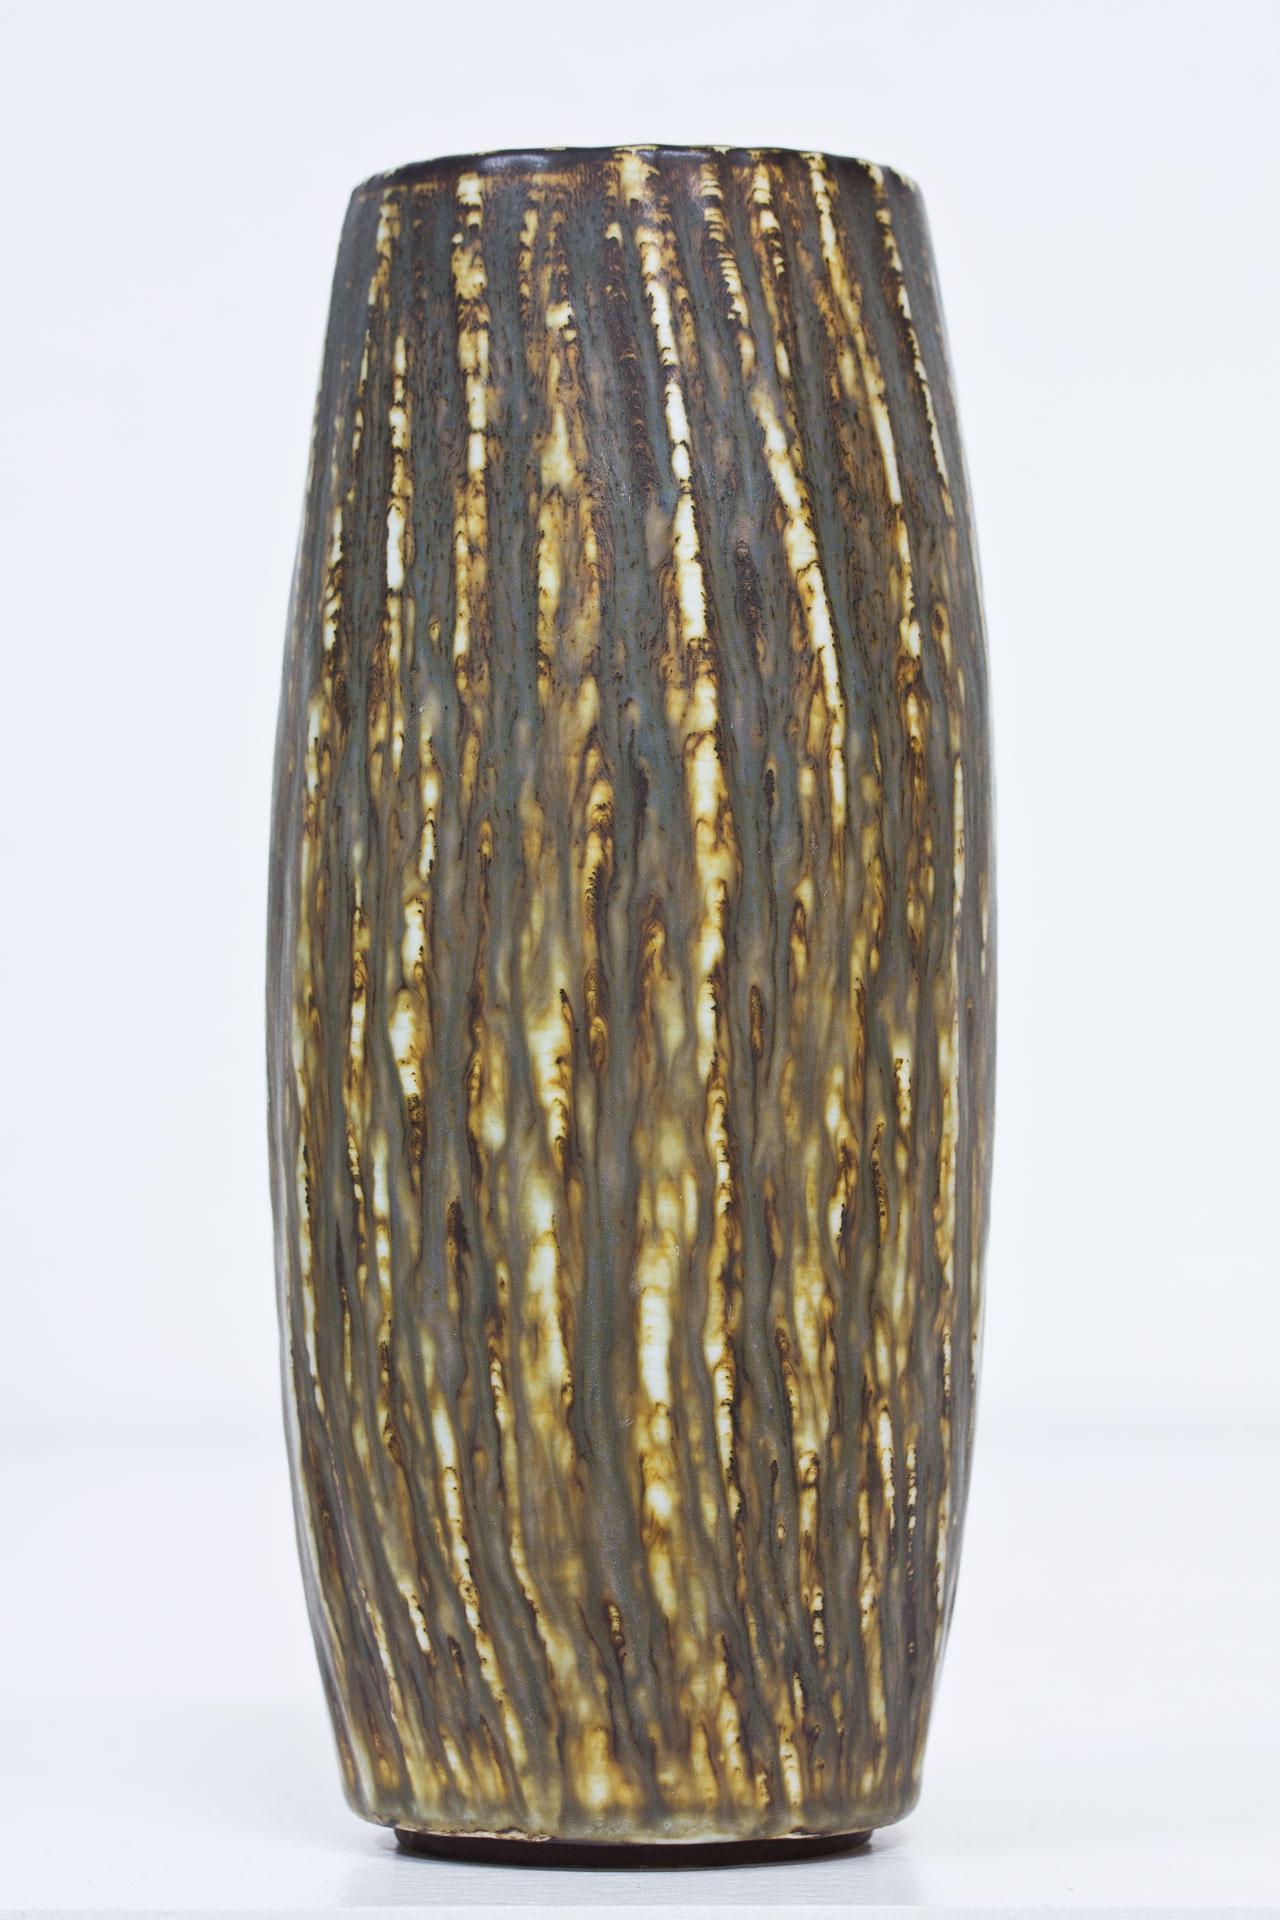 Swedish stoneware vase designed by Gunnar Nylund. Part of the 